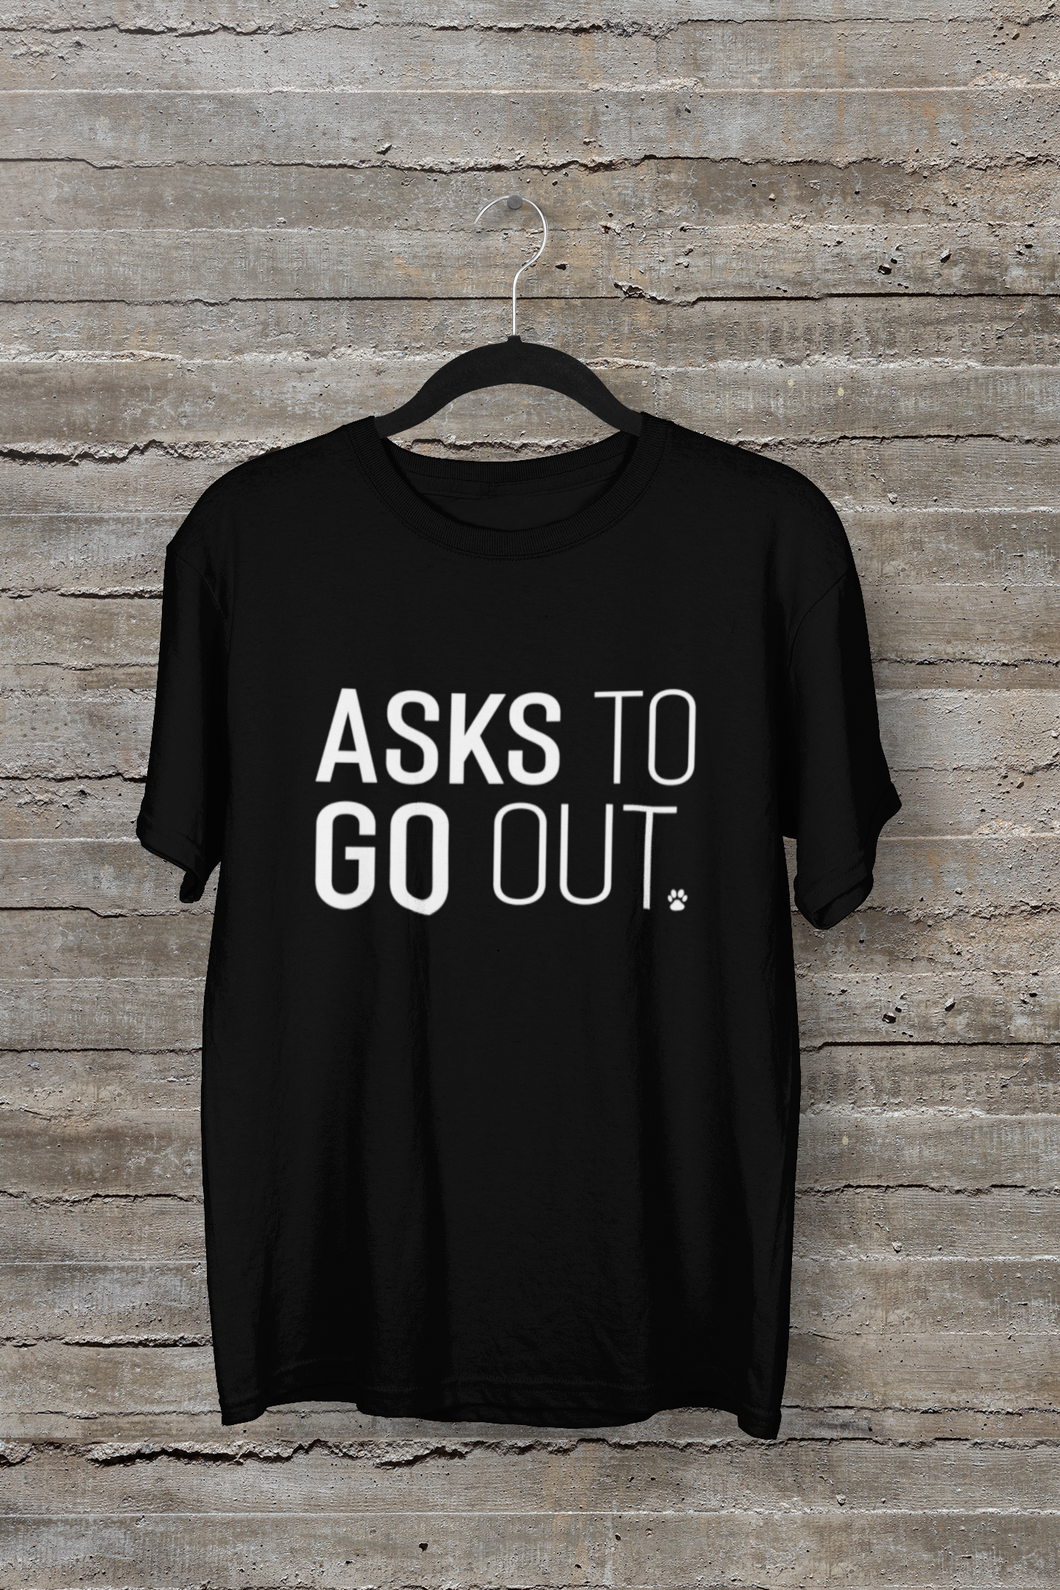 Asks to Go Out Men's/Unisex or Women's T-shirt